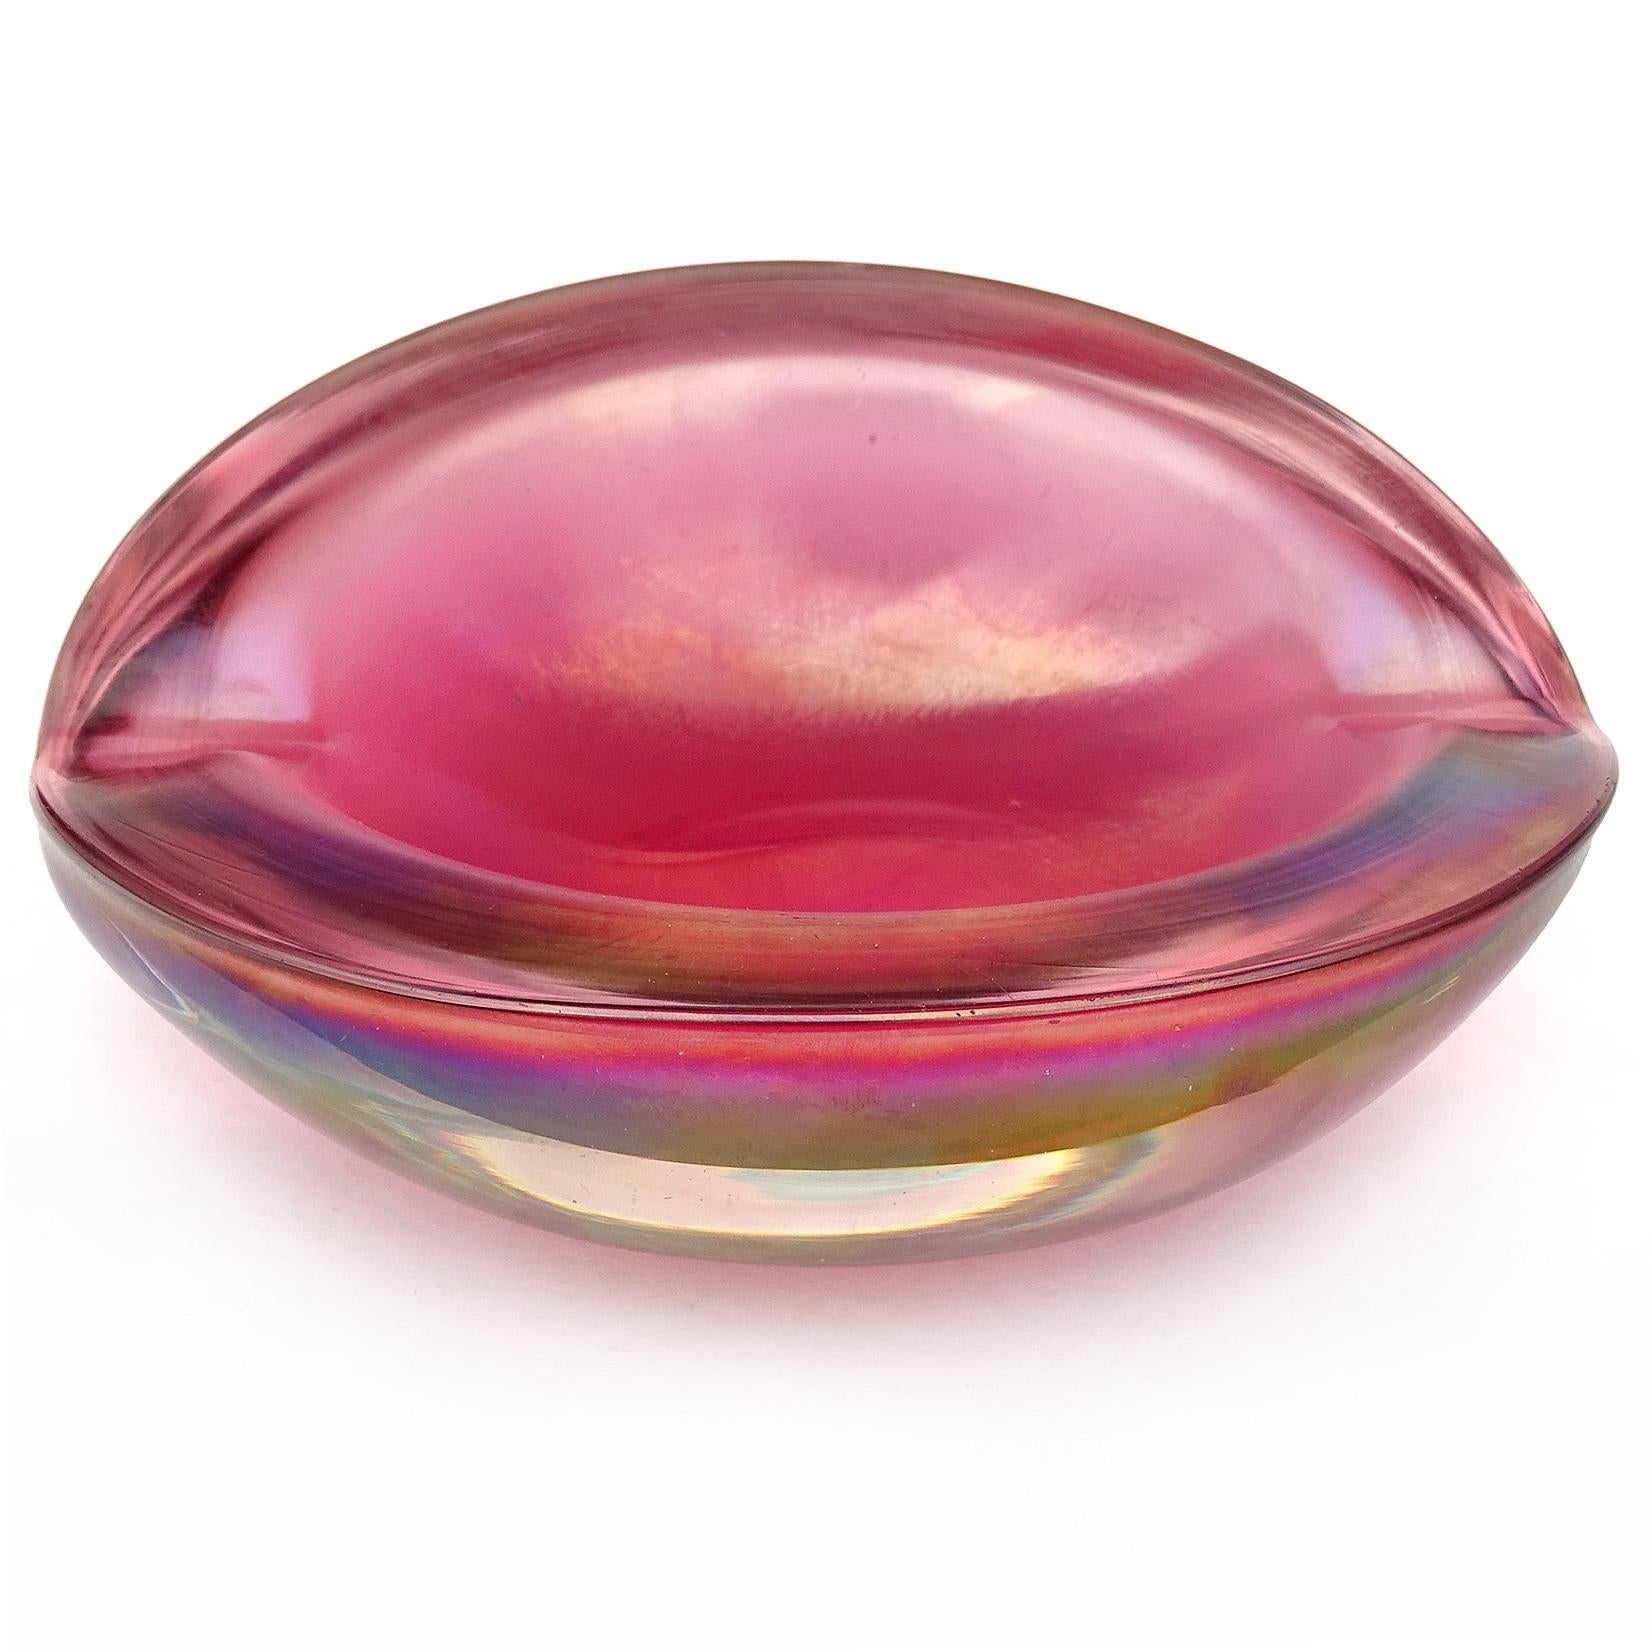 Beautiful vintage Murano hand blown Sommerso iridescent pink Italian art glass melon cut bowl. Documented to Master glass artist and designer Alfredo Barbini, circa 1950-1960. The bowl has a heavy aurene / iridescent surface showing a rainbow of